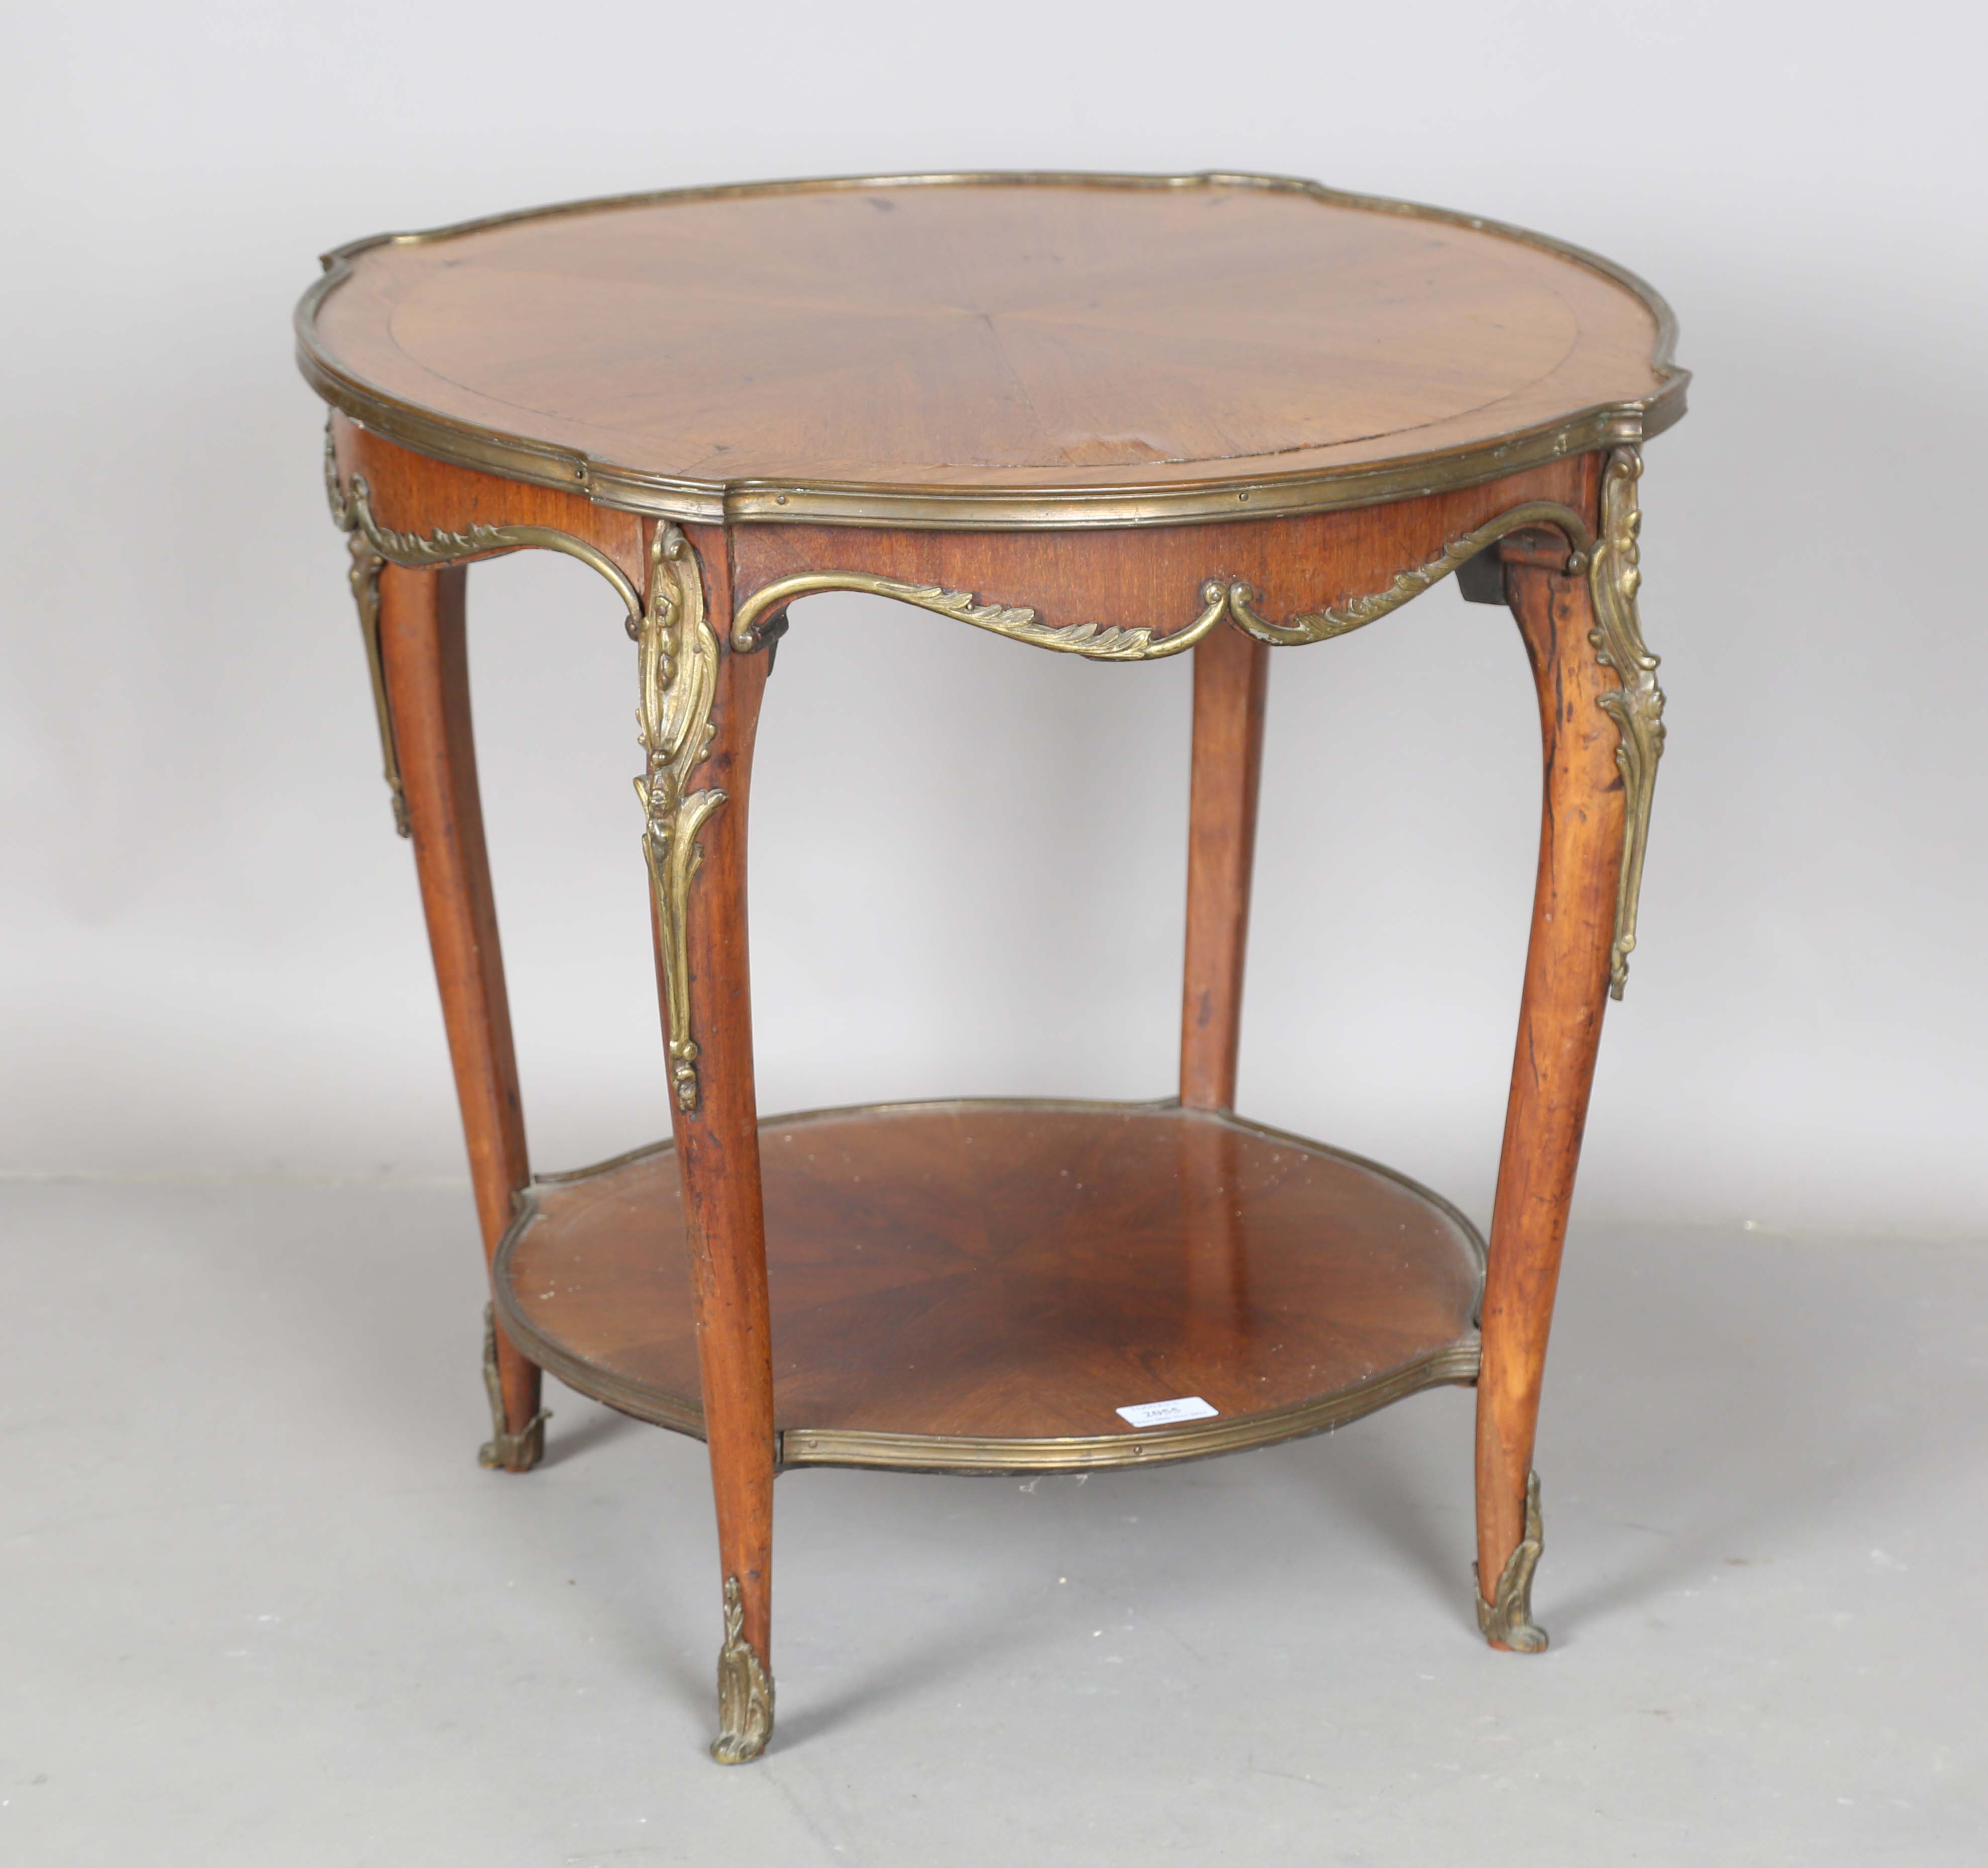 An early 20th century French walnut two-tier occasional table with radial veneers and gilt metal